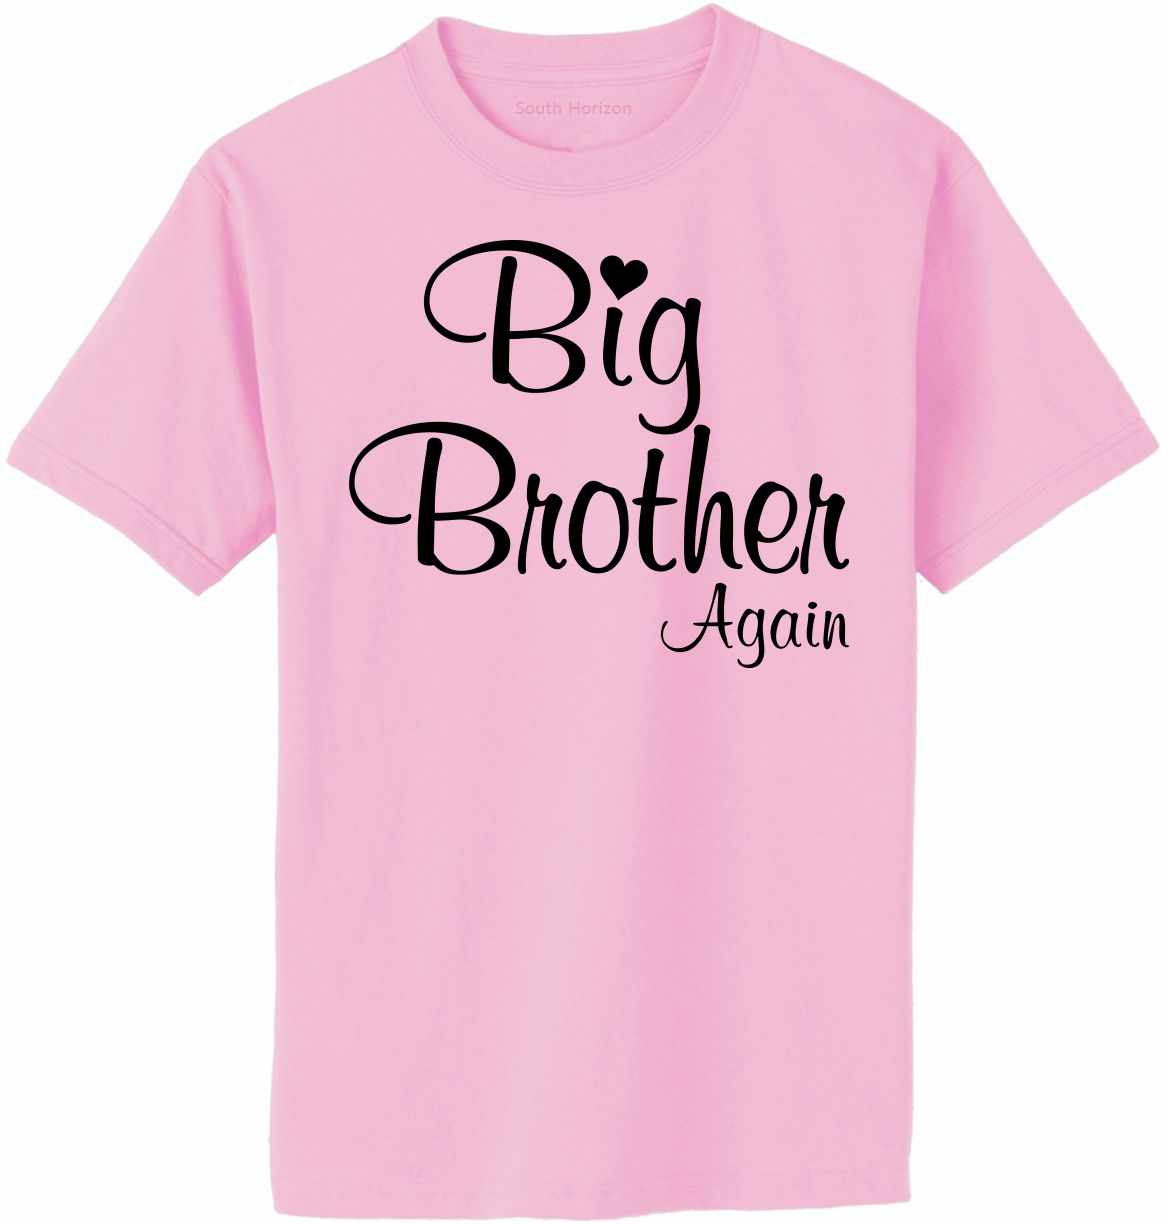 Big Brother Again on Adult T-Shirt (#1337-1)